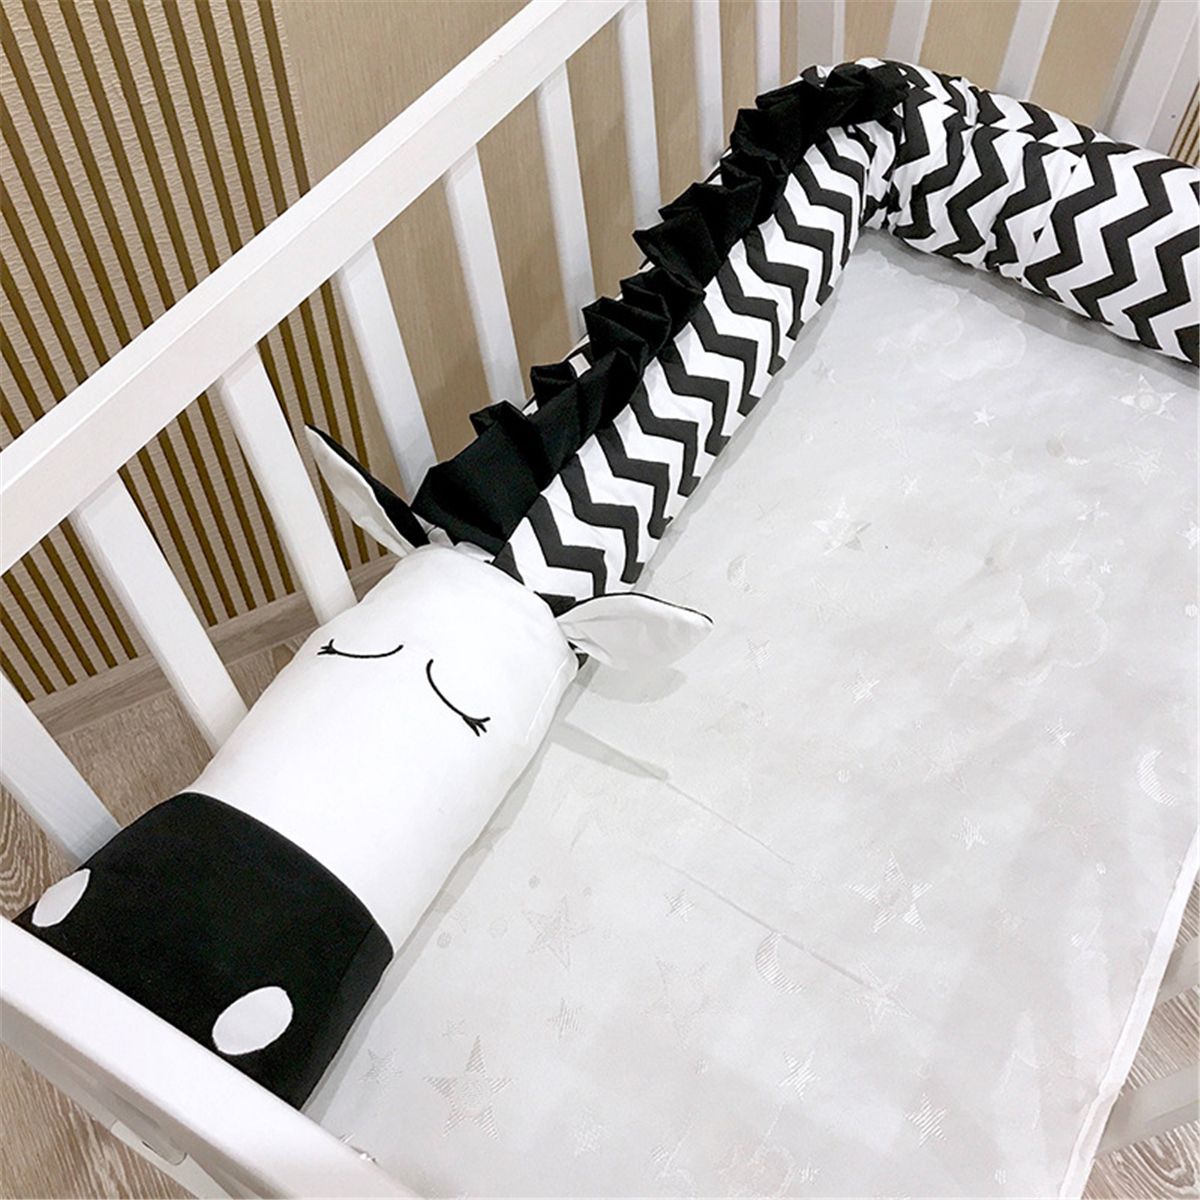 Baby-Infant-Crocodile-Zebra-Shaped-Pillow-Cotton-Cushion-Kids-Bed-Crib-Bumper-Protector-1575330